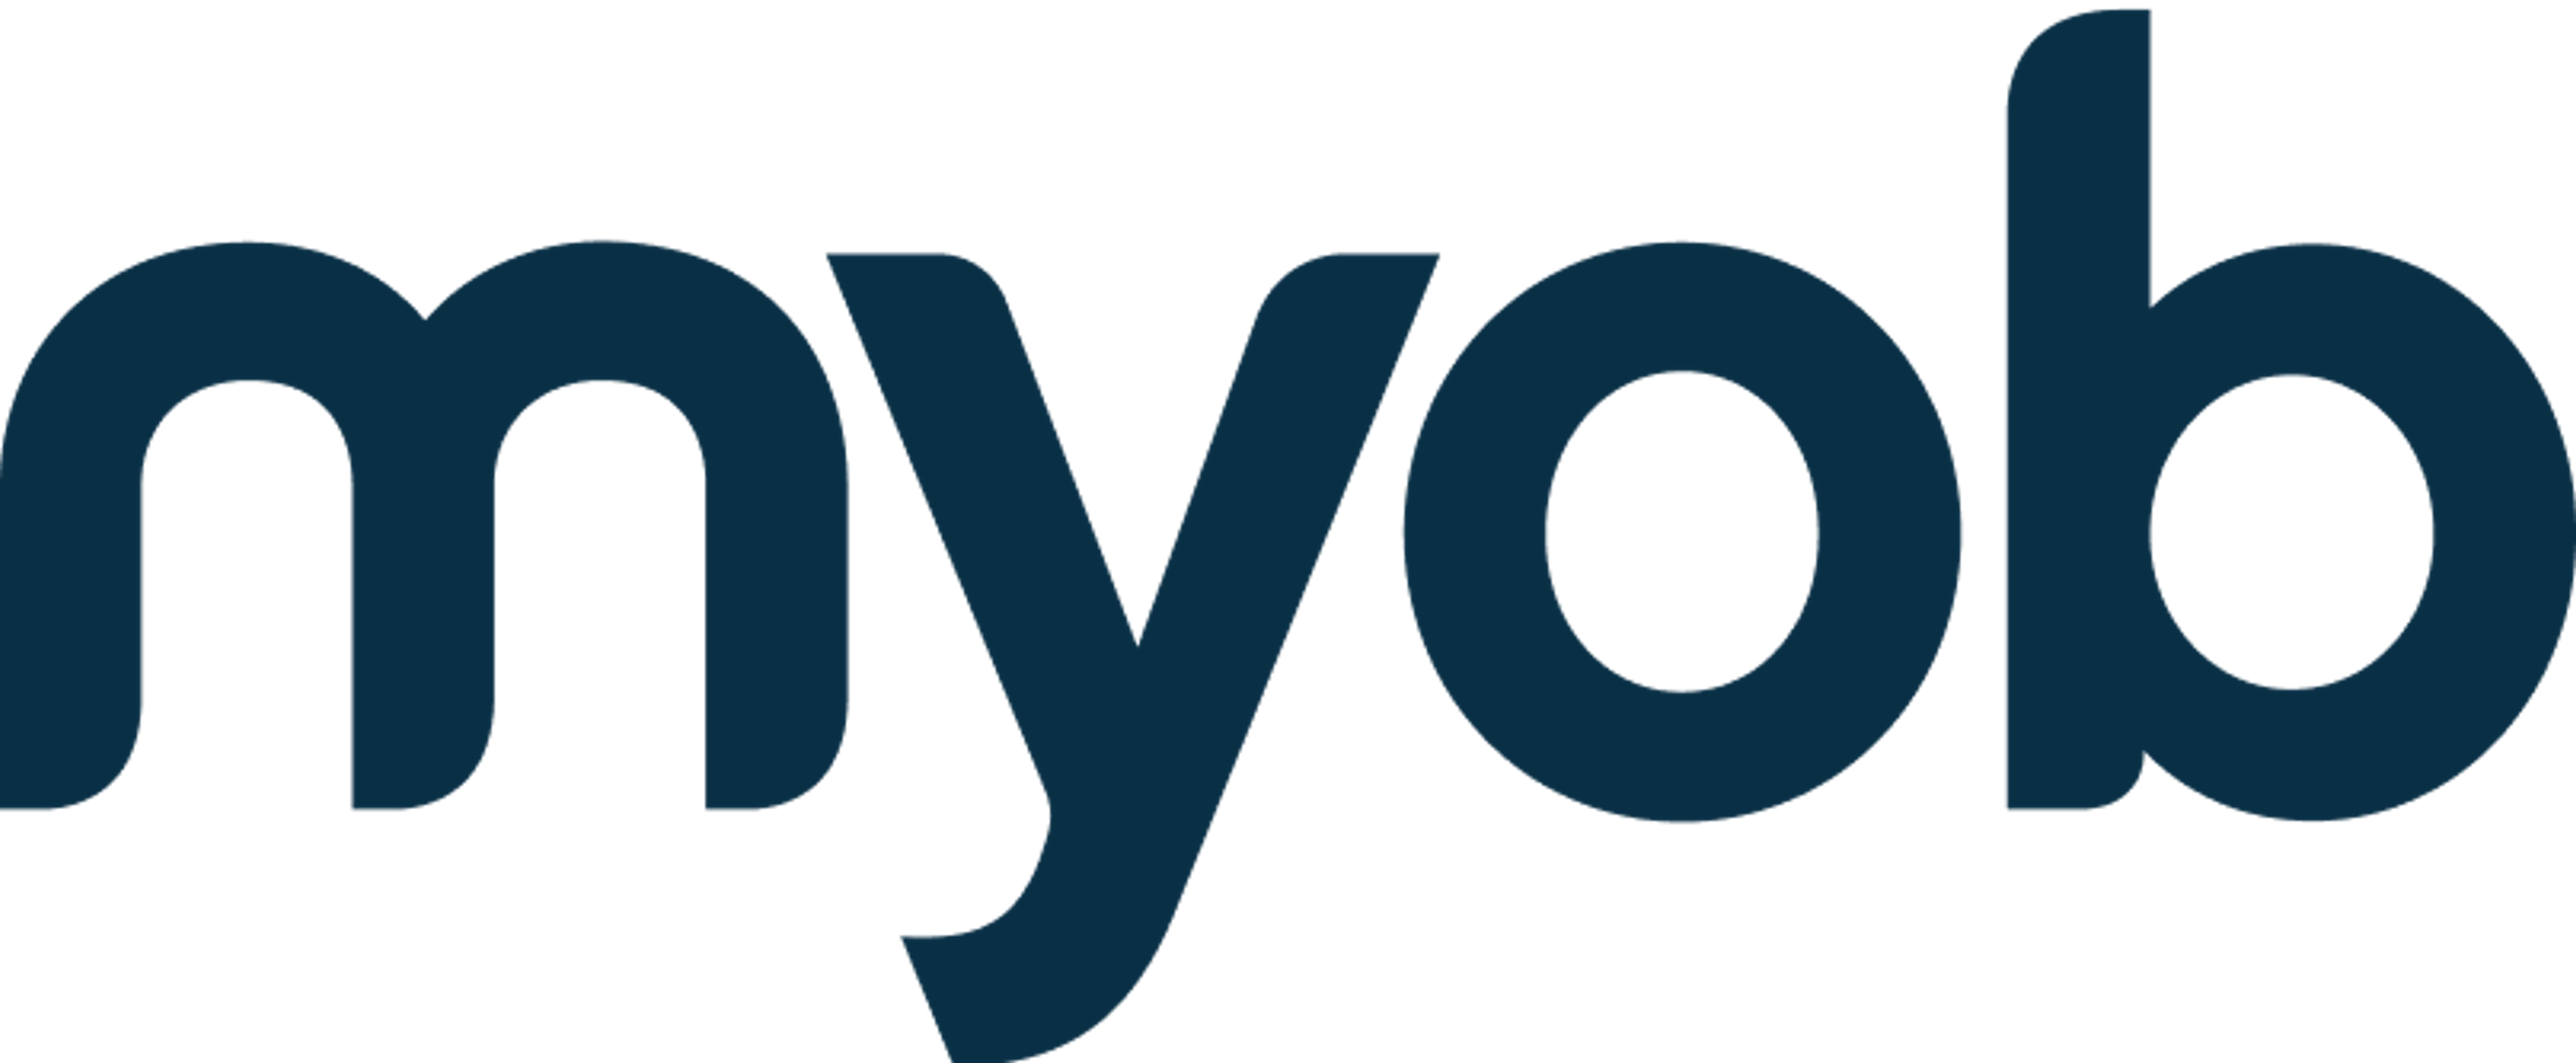 myob logo positioned next to the quote from the customer